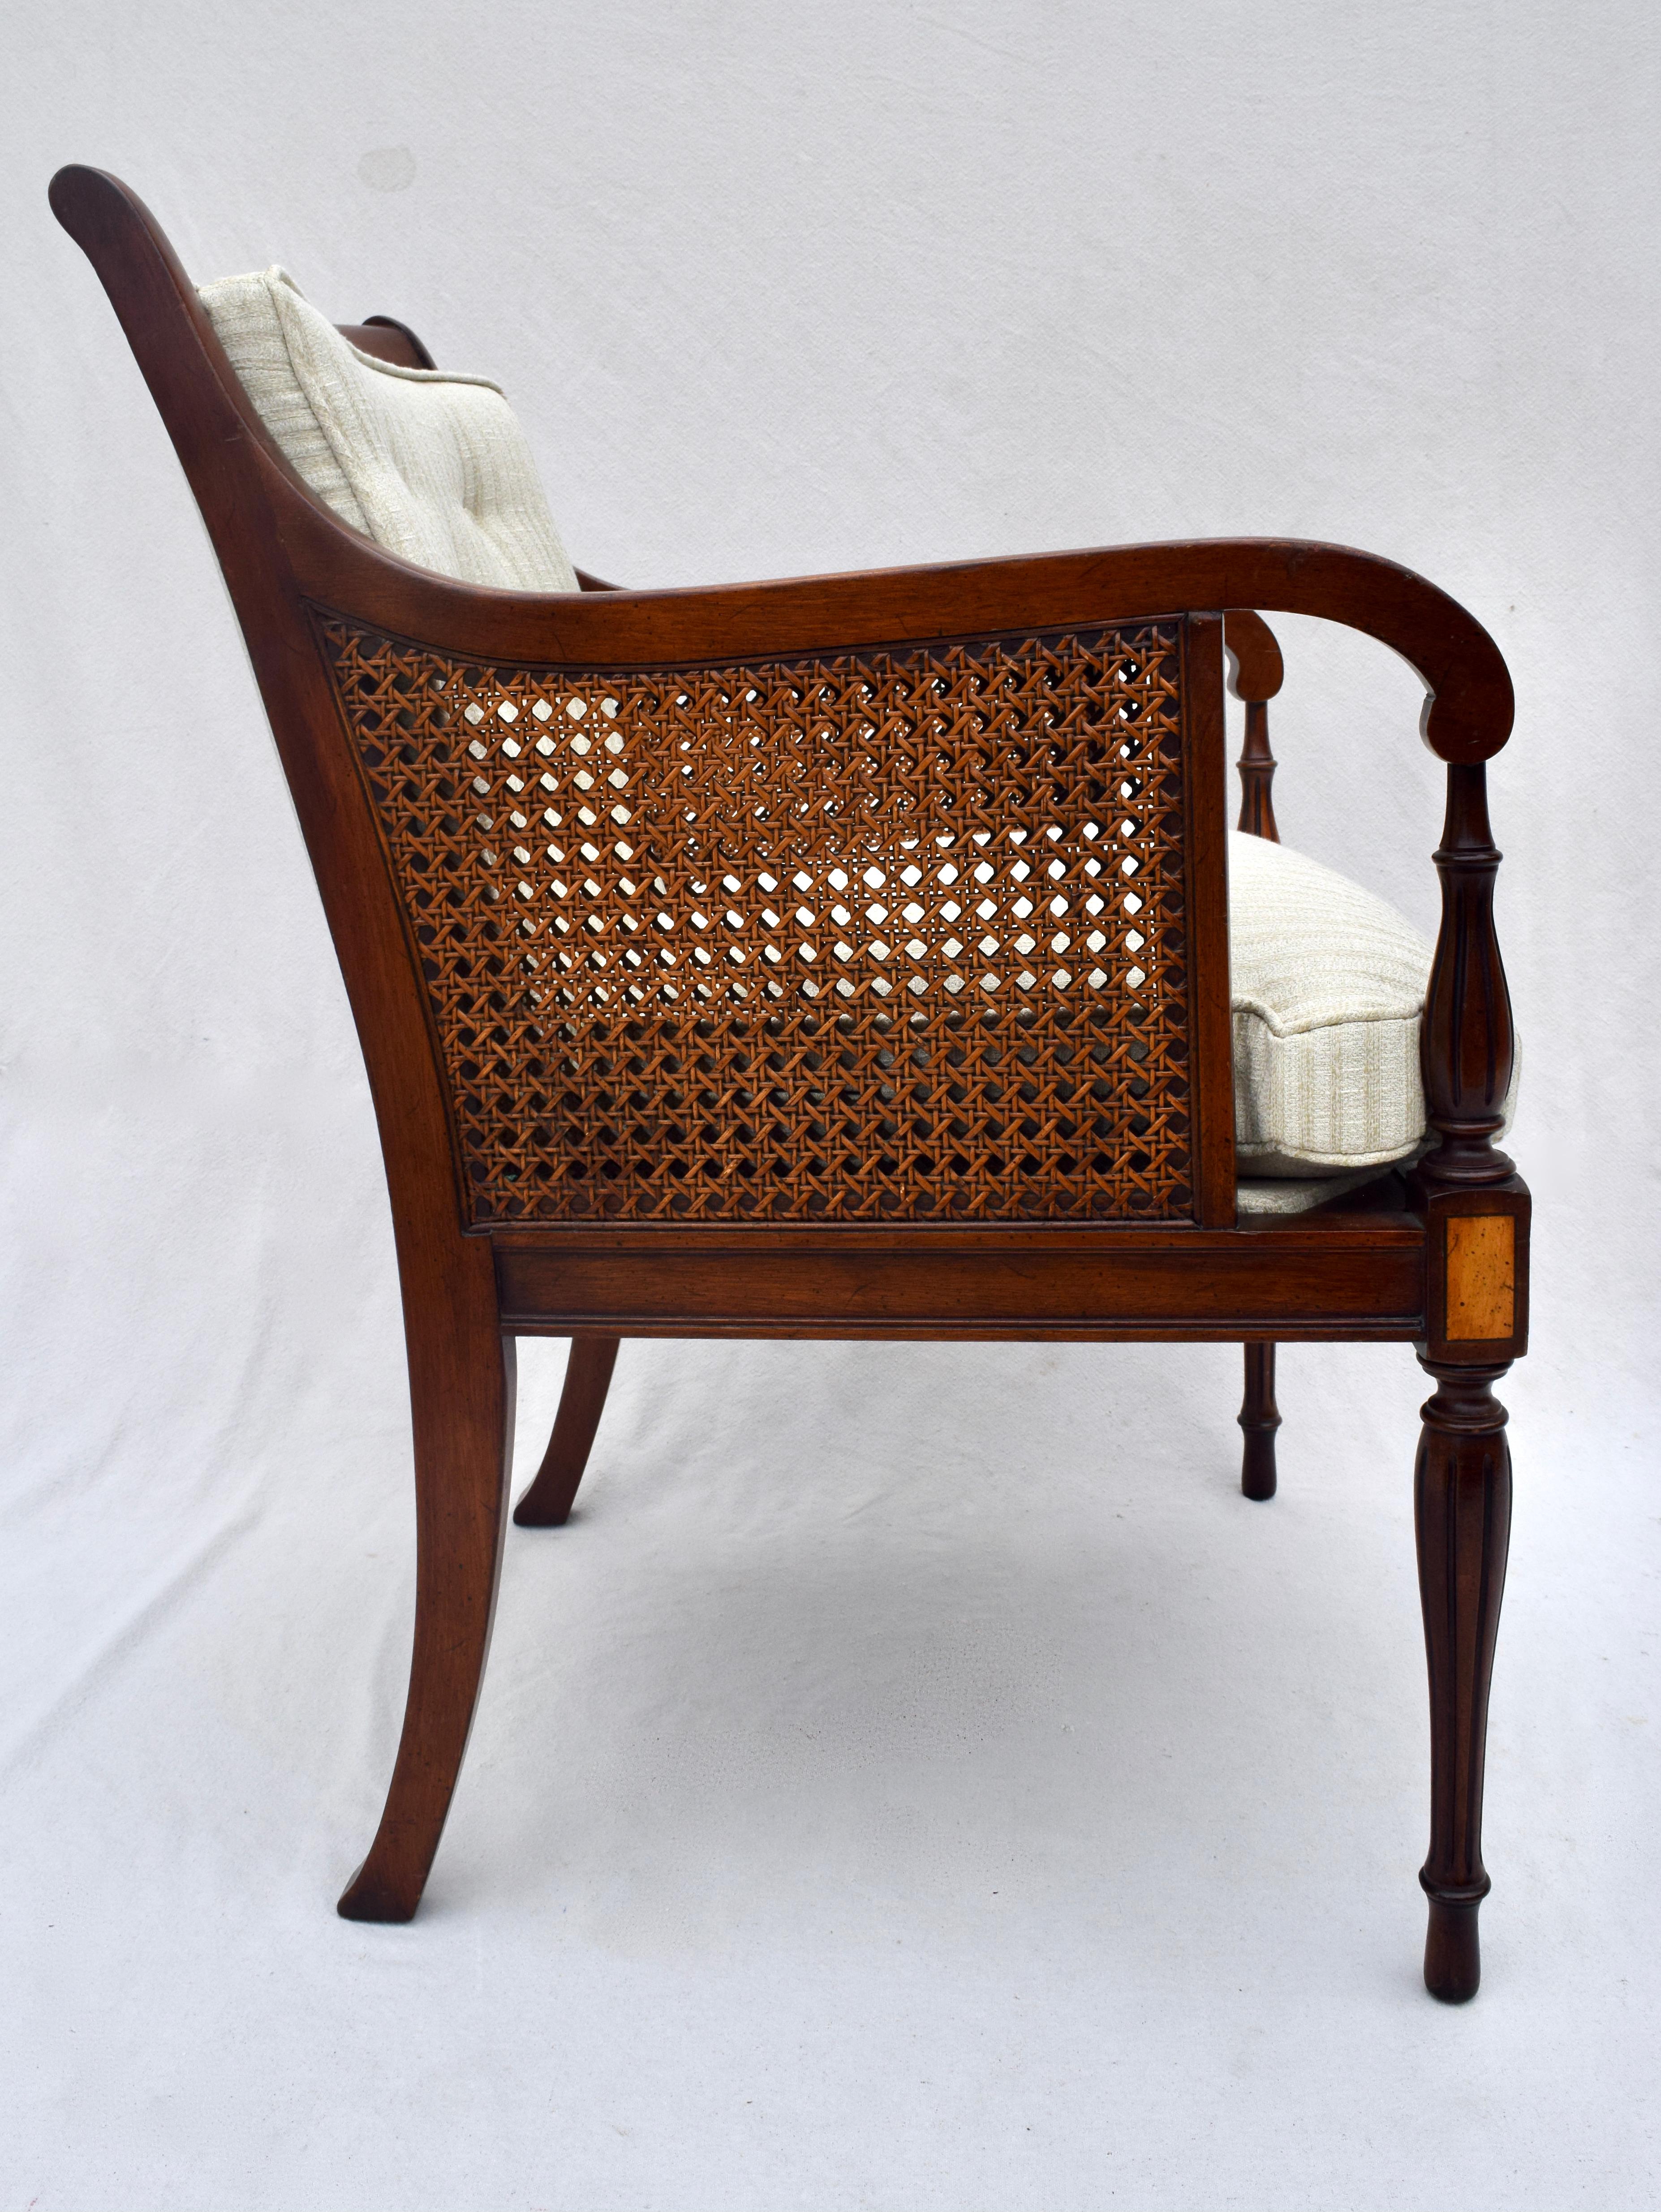 Silk Hickory Chair Regency Style Double Caned Chairs